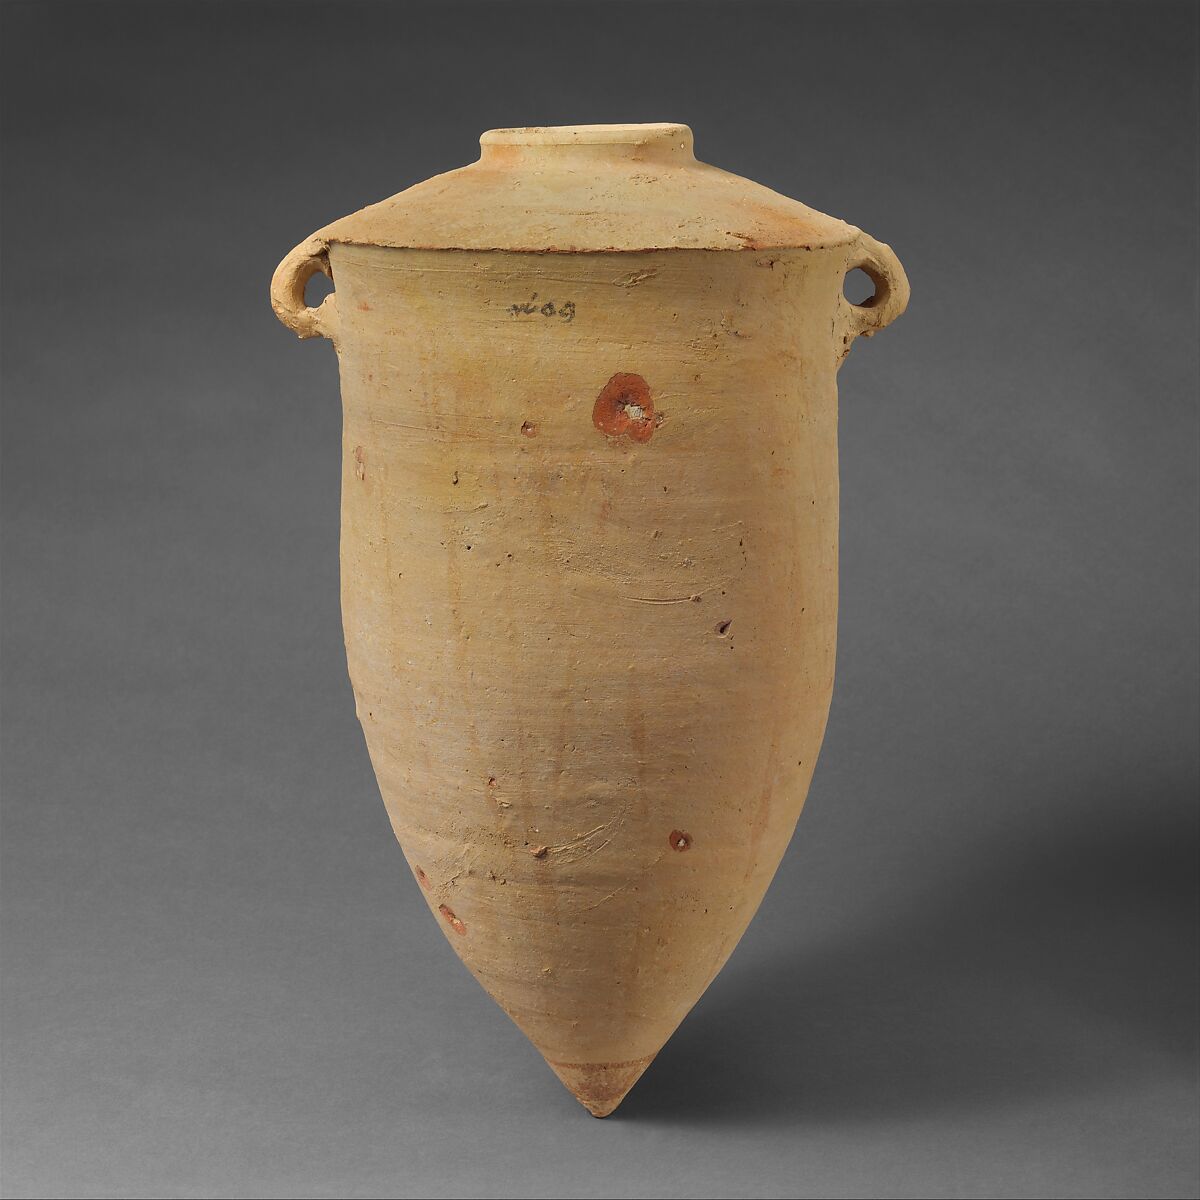 Terracotta amphora with Phoenician inscription, Clay, Cypriot